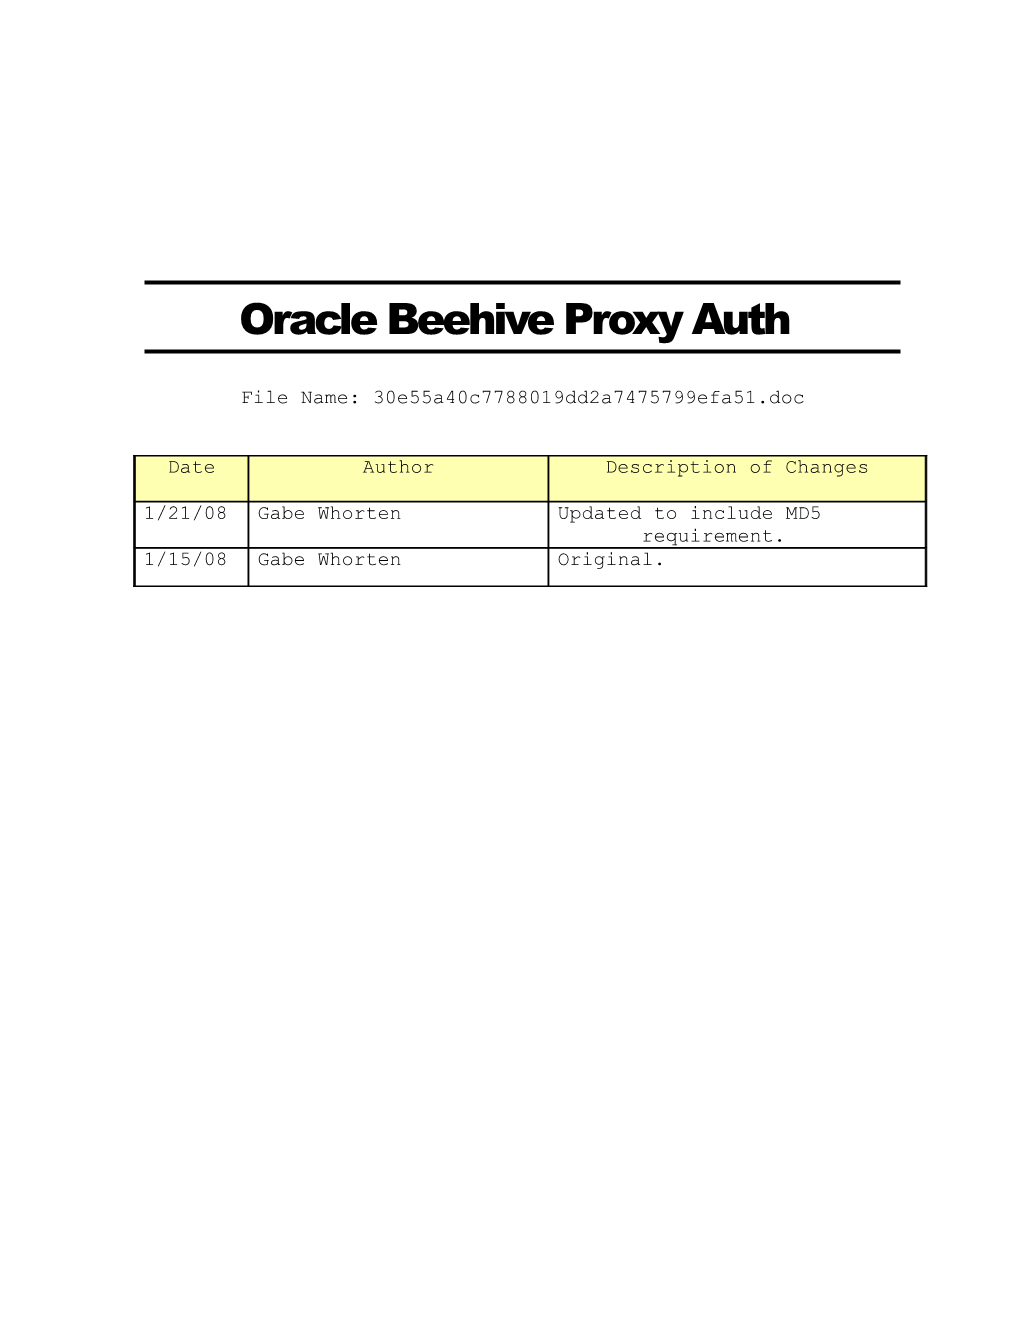 Oracle Beehive Proxy Auth